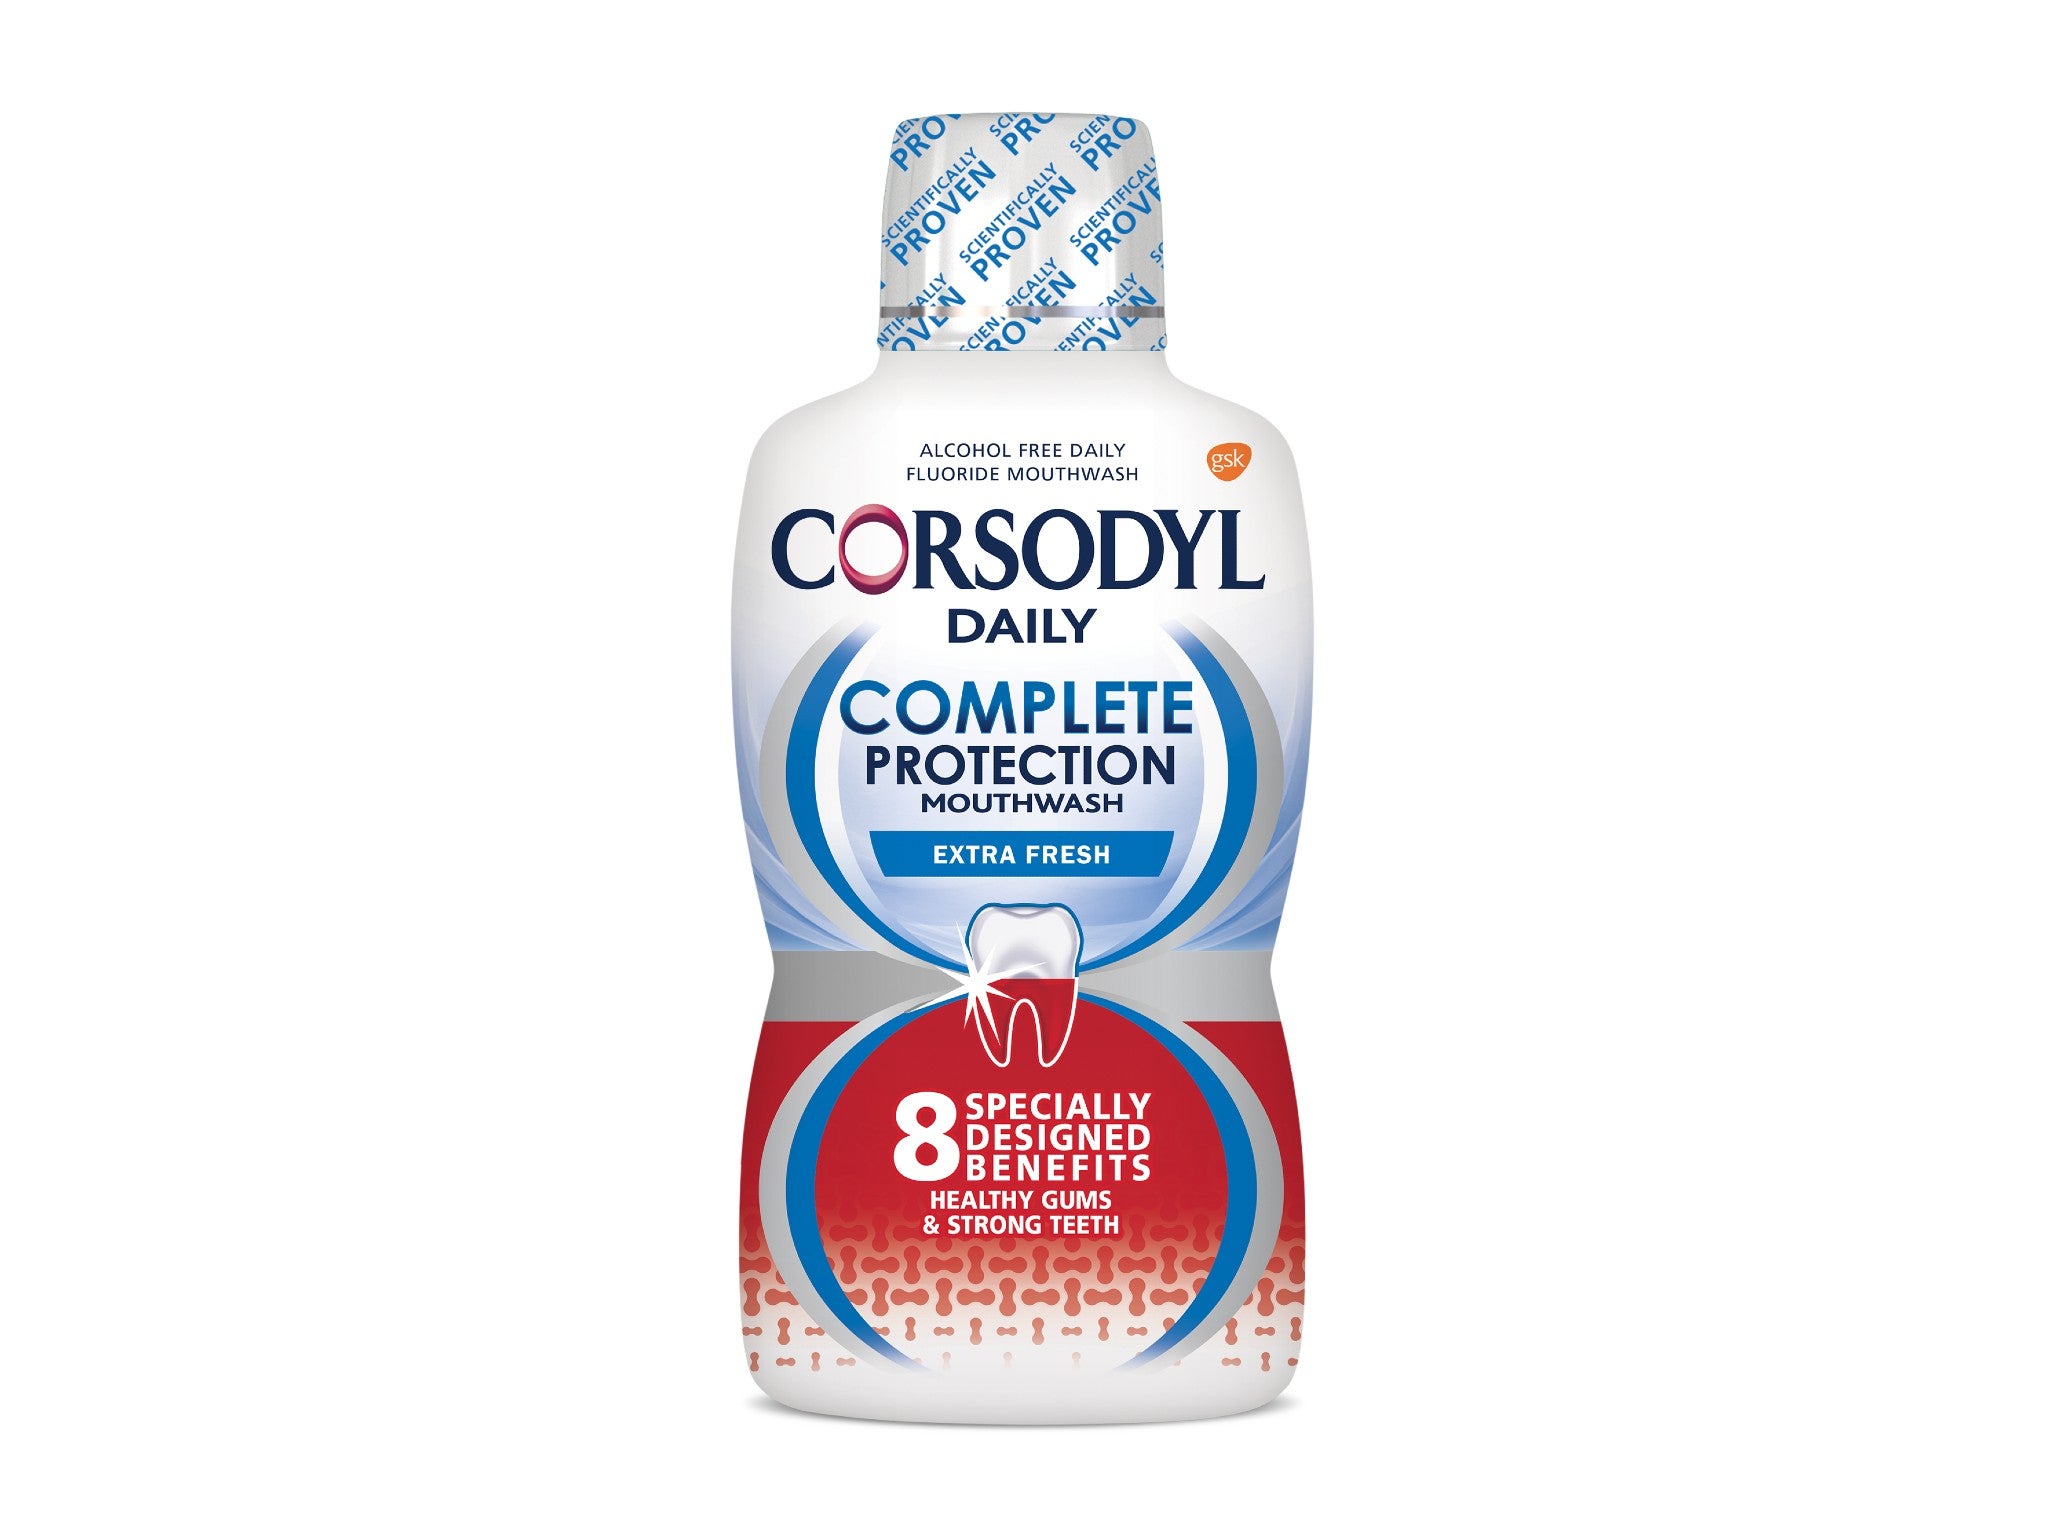 Corsodyl daily complete protection mouthwash indybest.jpg